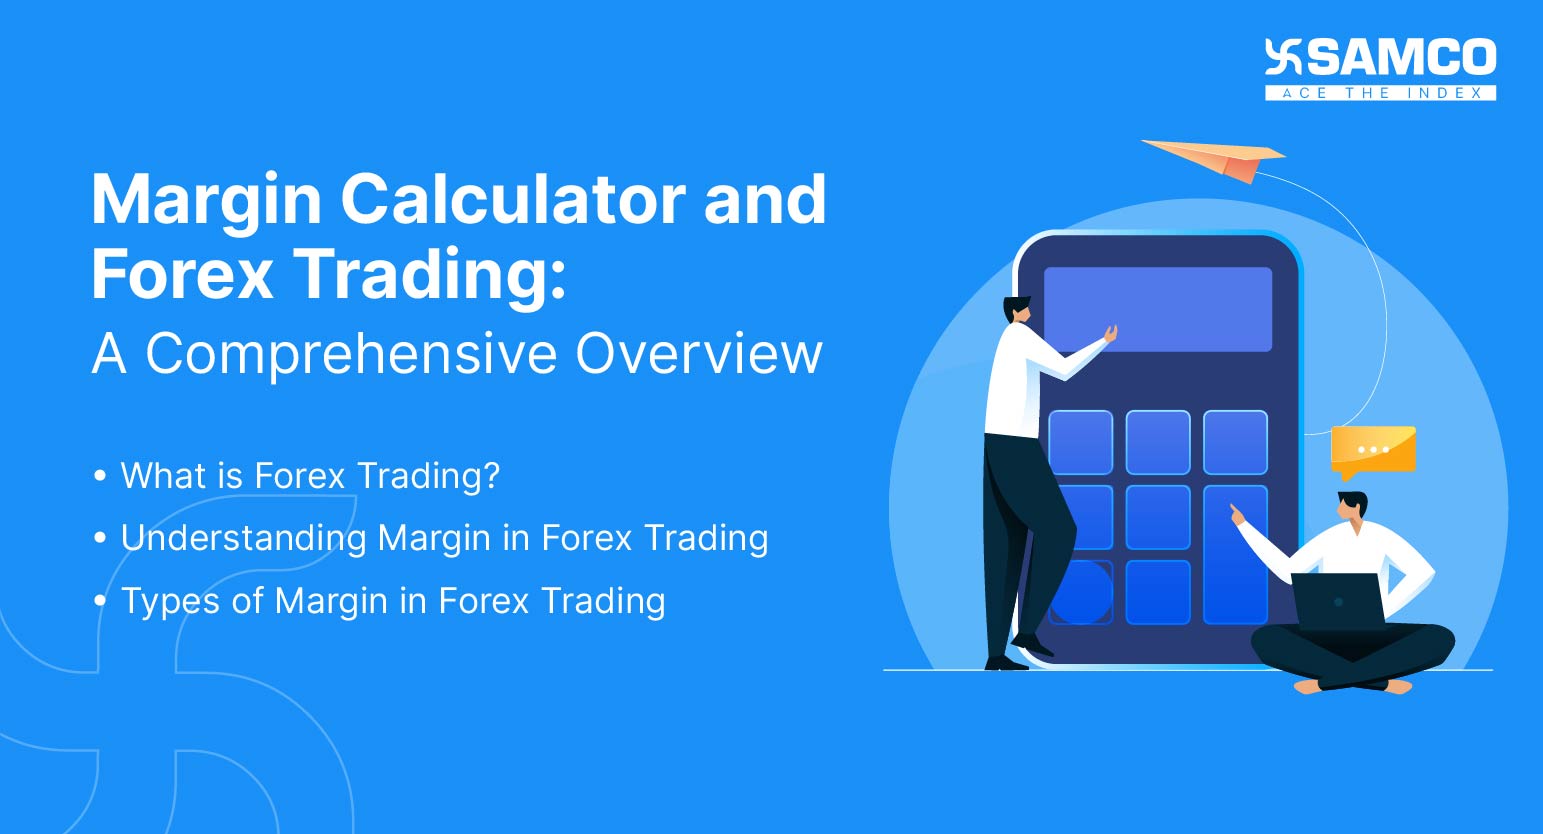 Margin Calculator and Forex Trading